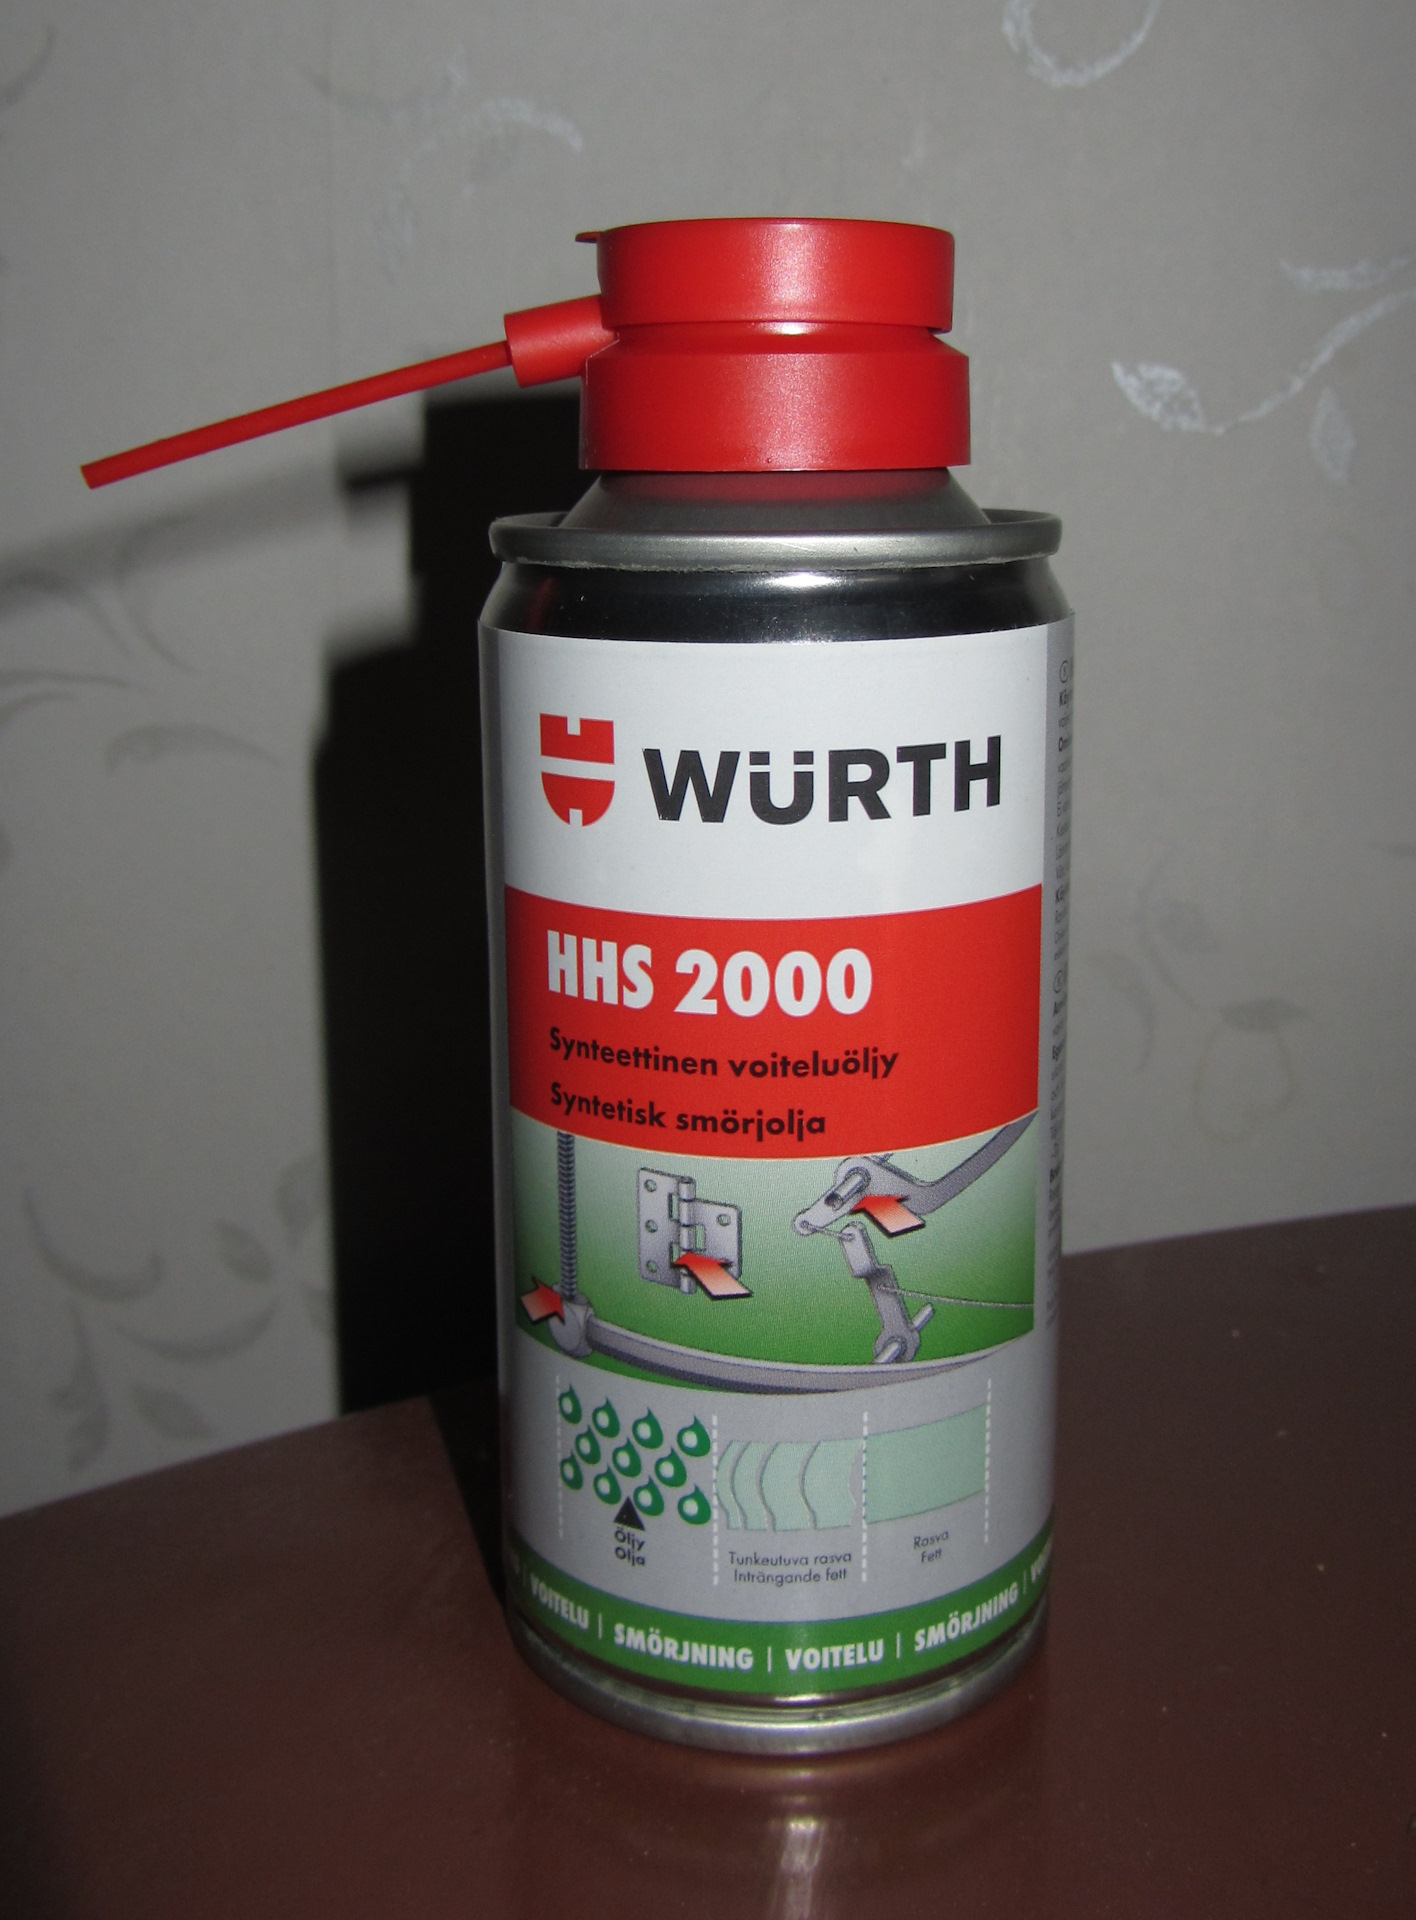 Wurth hhs 2000